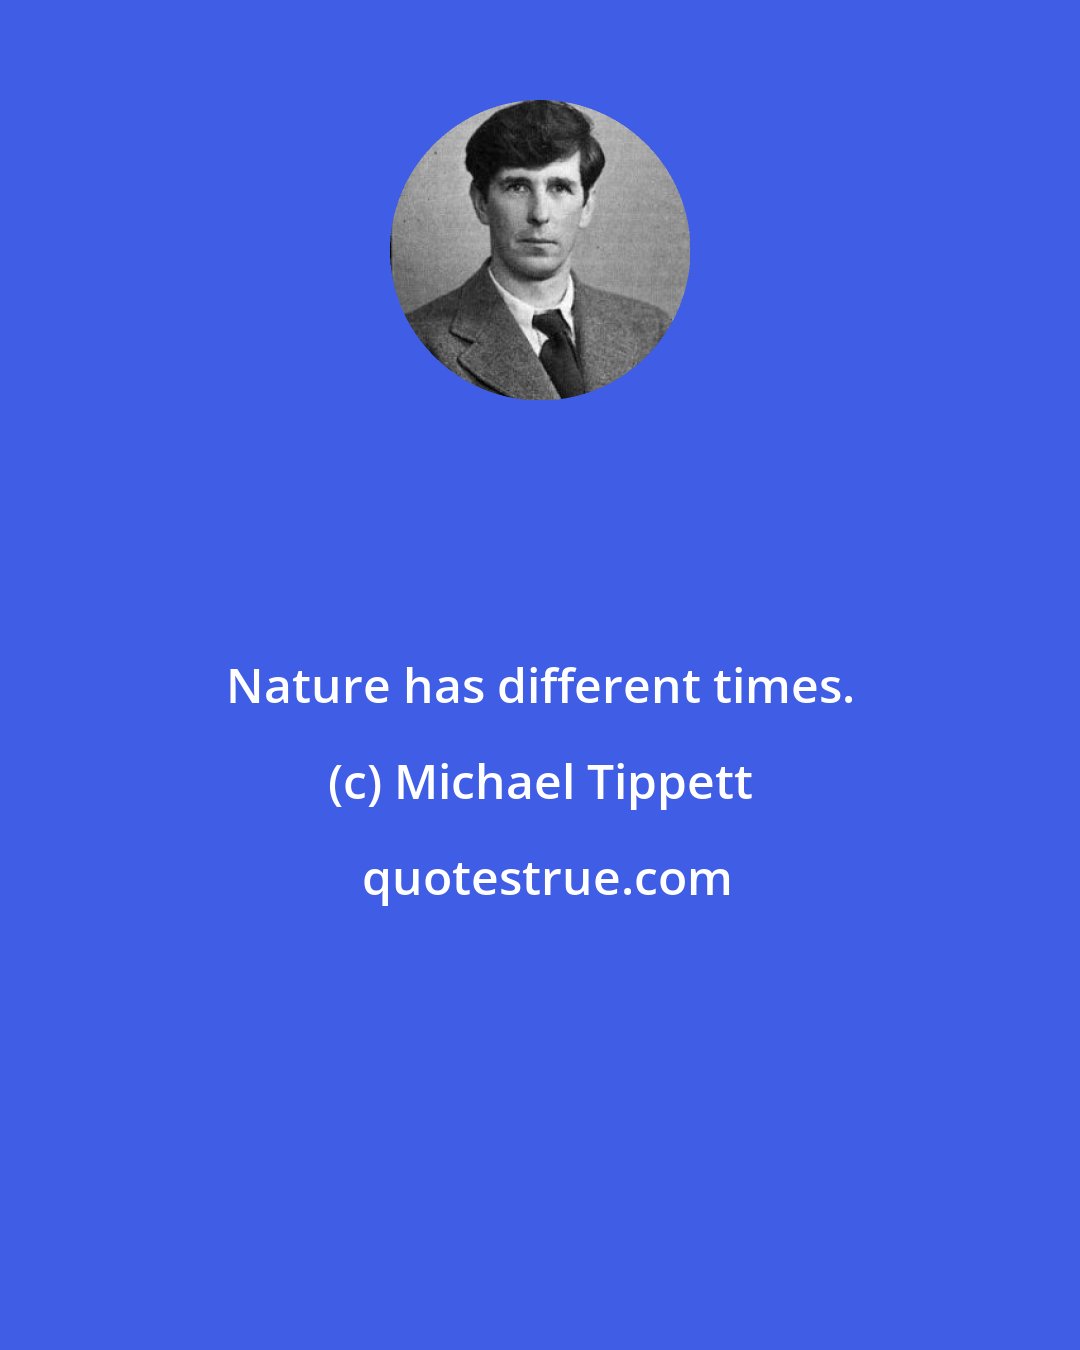 Michael Tippett: Nature has different times.